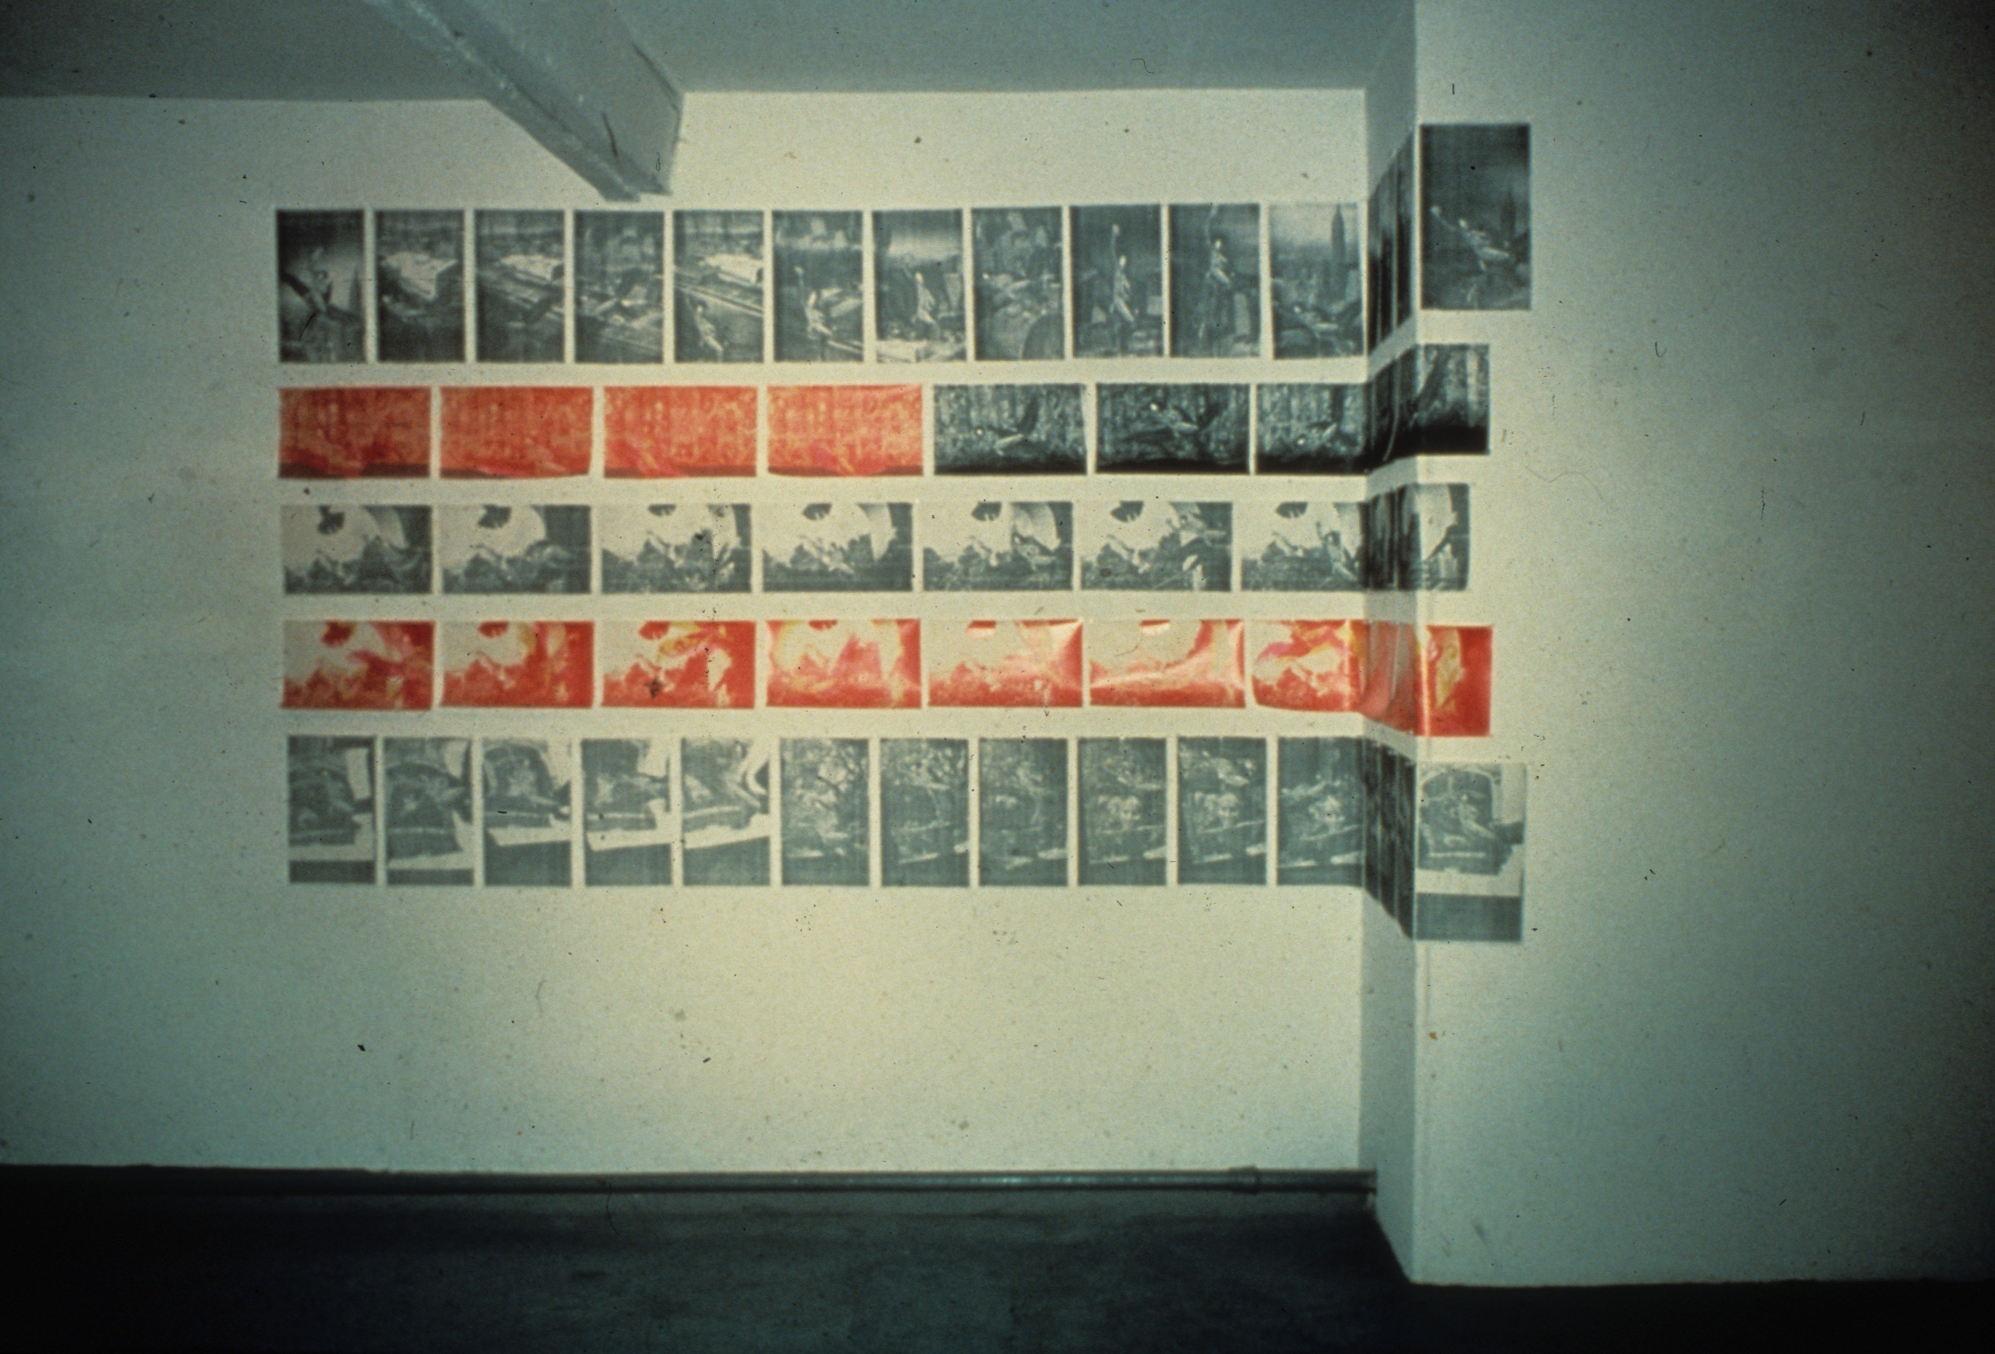 Image of the interior of a museum or gallery with a series of grayscale and orange-red compositions arranged in a grid and extending over a dogleg corner of the wall.